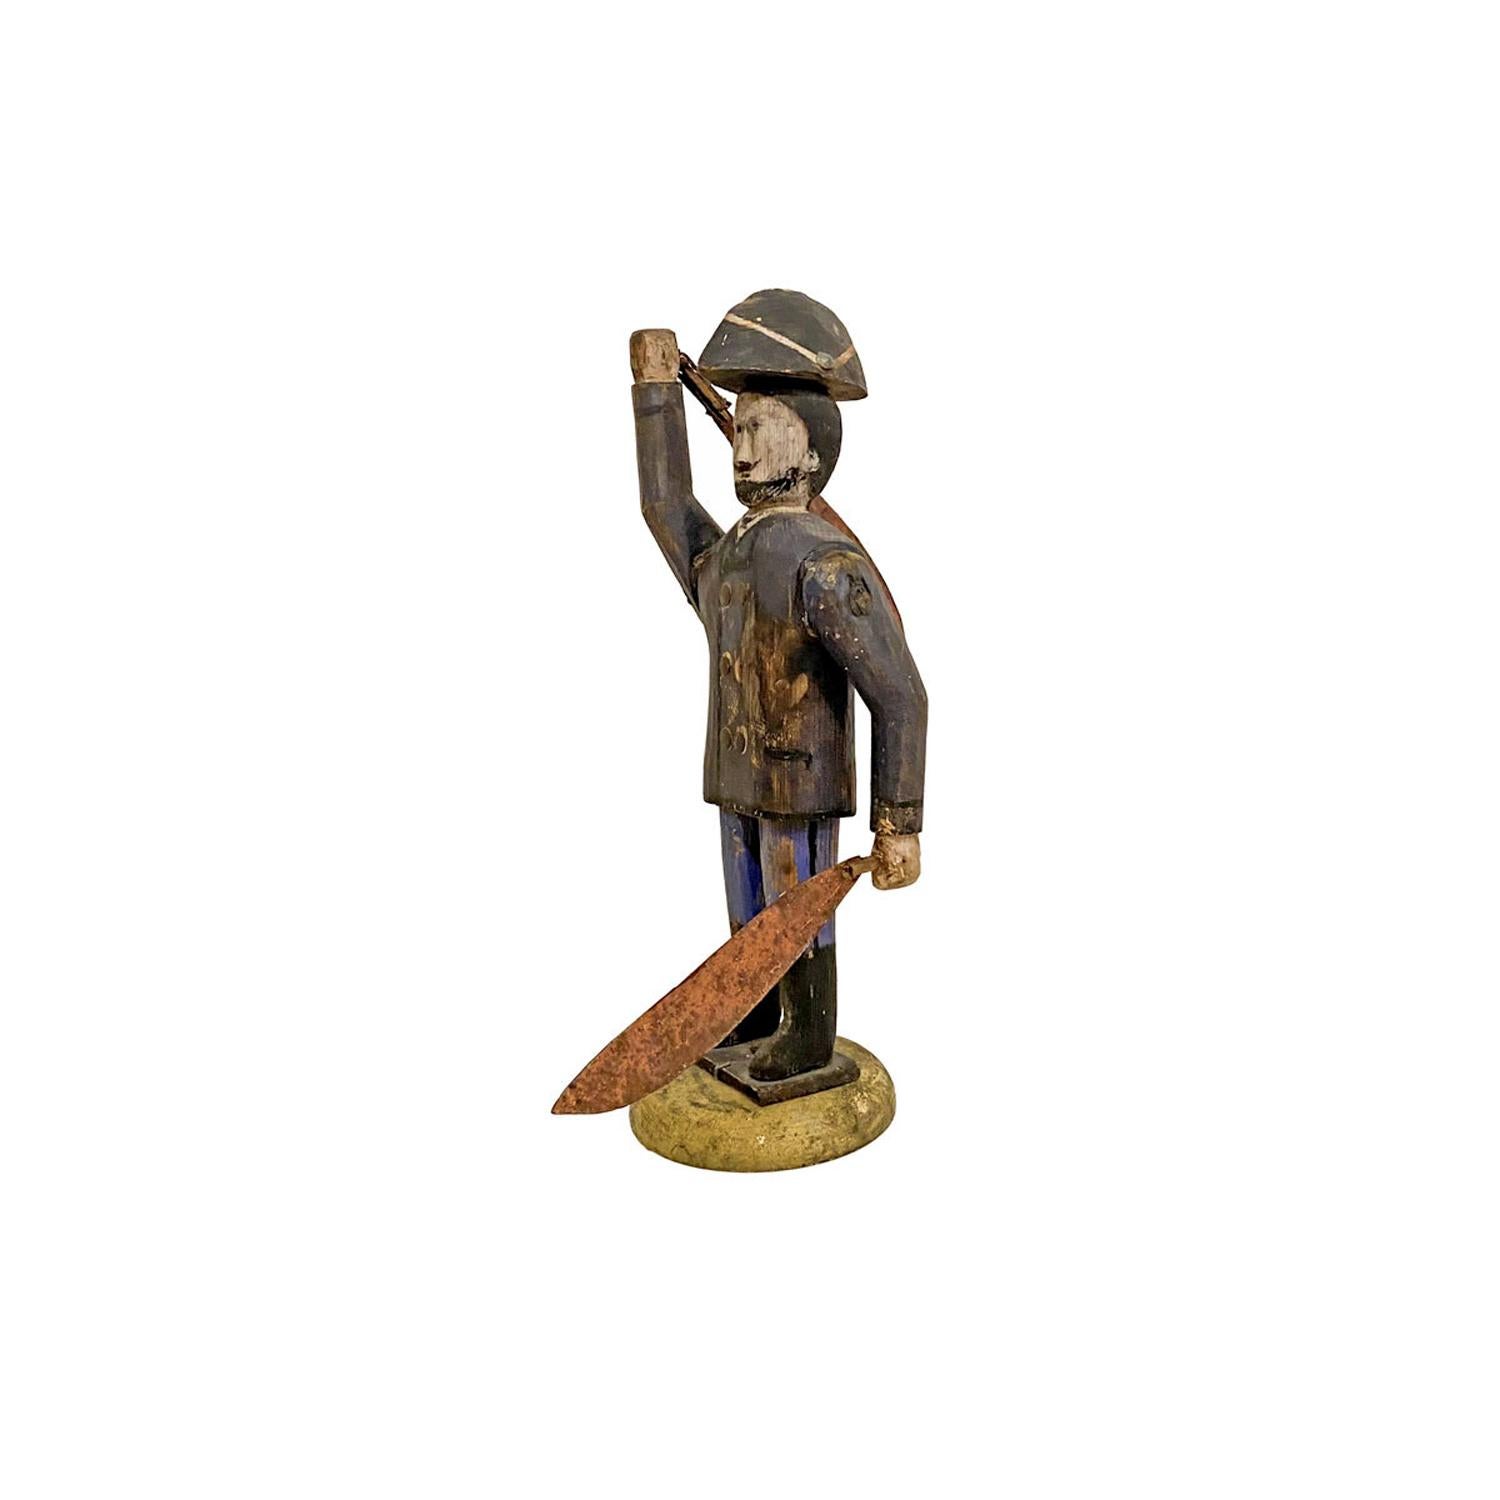 Carved and painted Pine with rotating sheet iron swords, with black hair, mustache and beard, bicorn hat, blue jacket with tacks for buttons, black boots mounted on a yellow circular base, original surface. American, Measure: 15” high, c. 1900